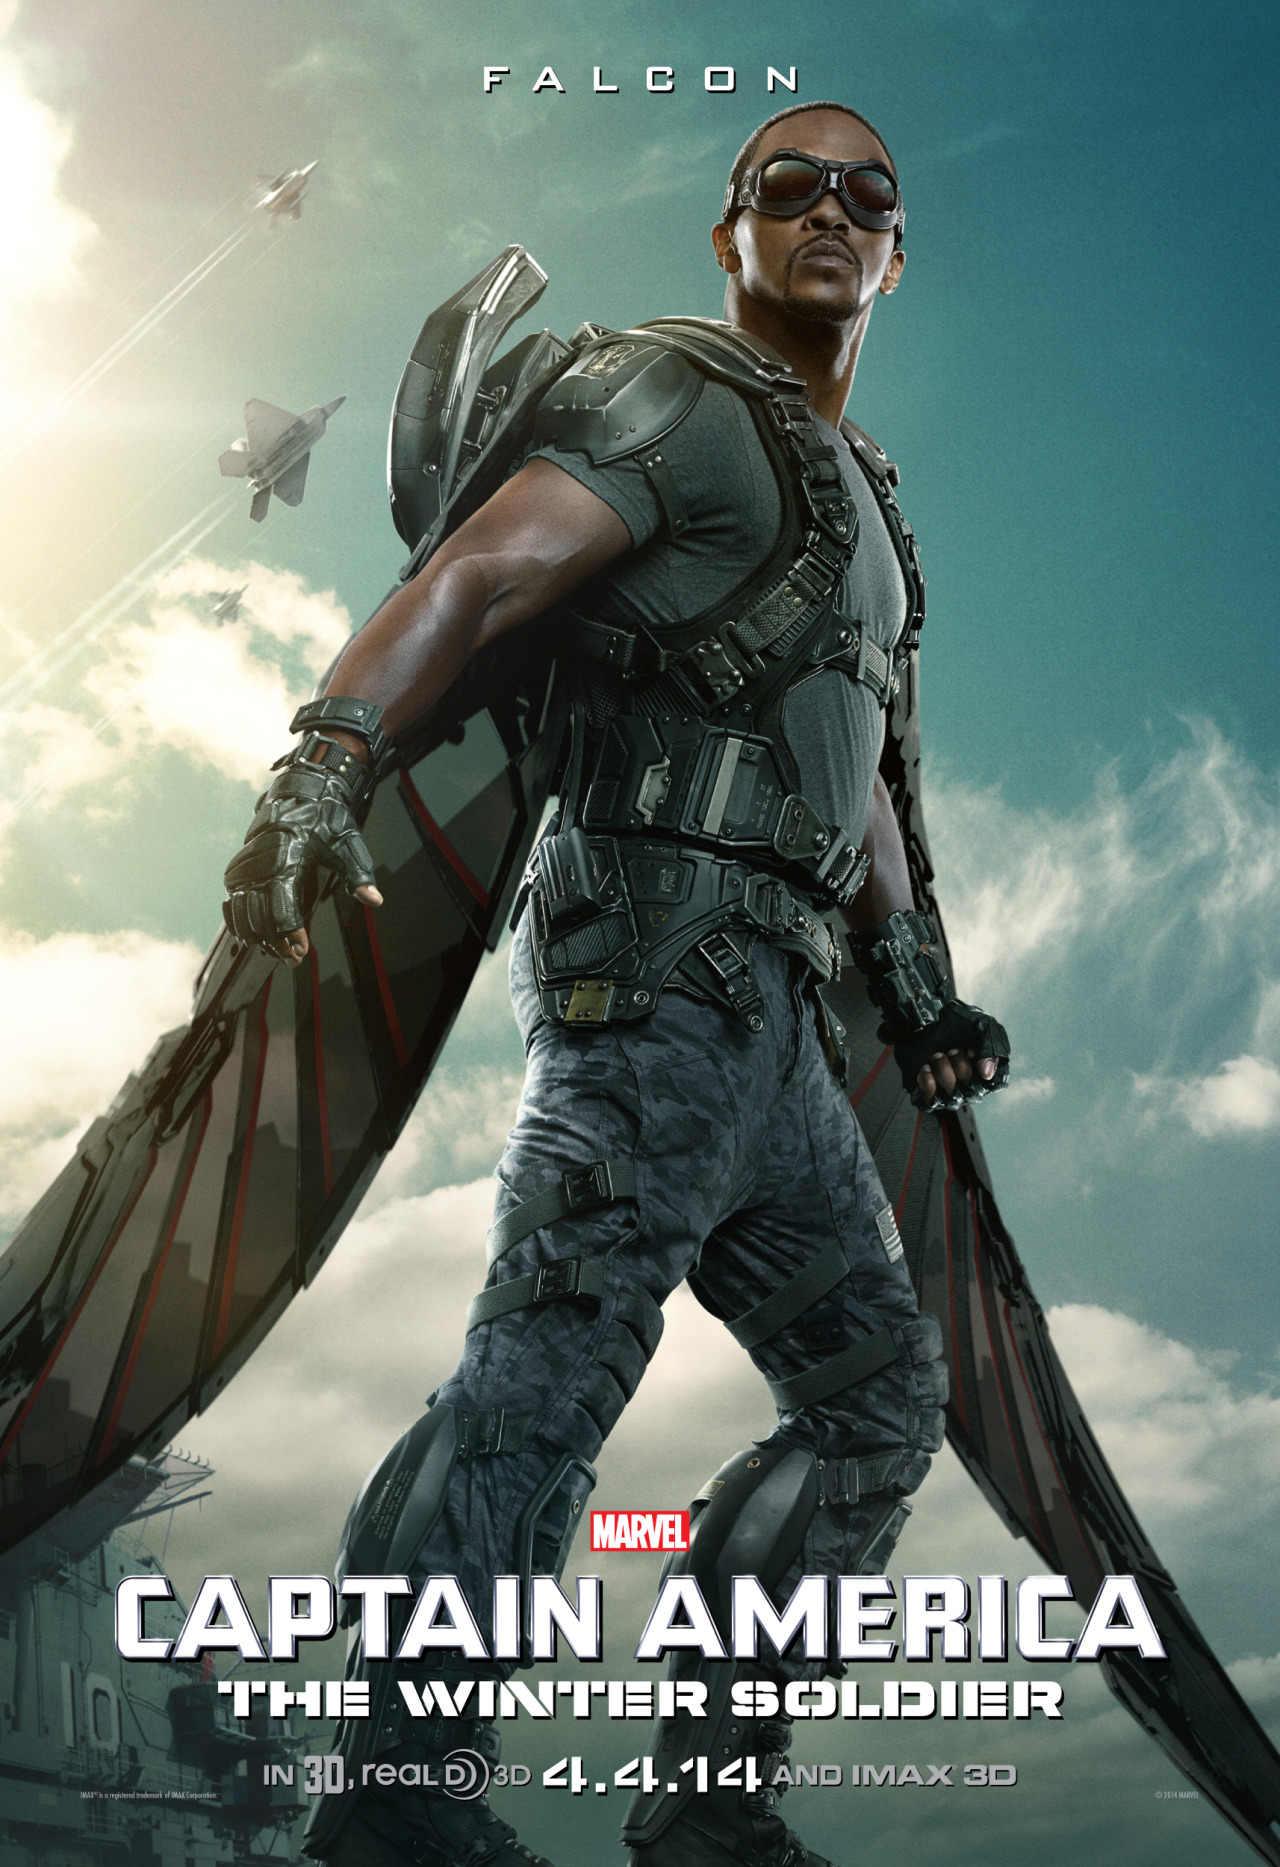 marvelentertainment:
“ Falcon takes flight on the brand new poster for Marvel’s “Captain America: The Winter Soldier,” hitting theaters April 4, 2014!
”